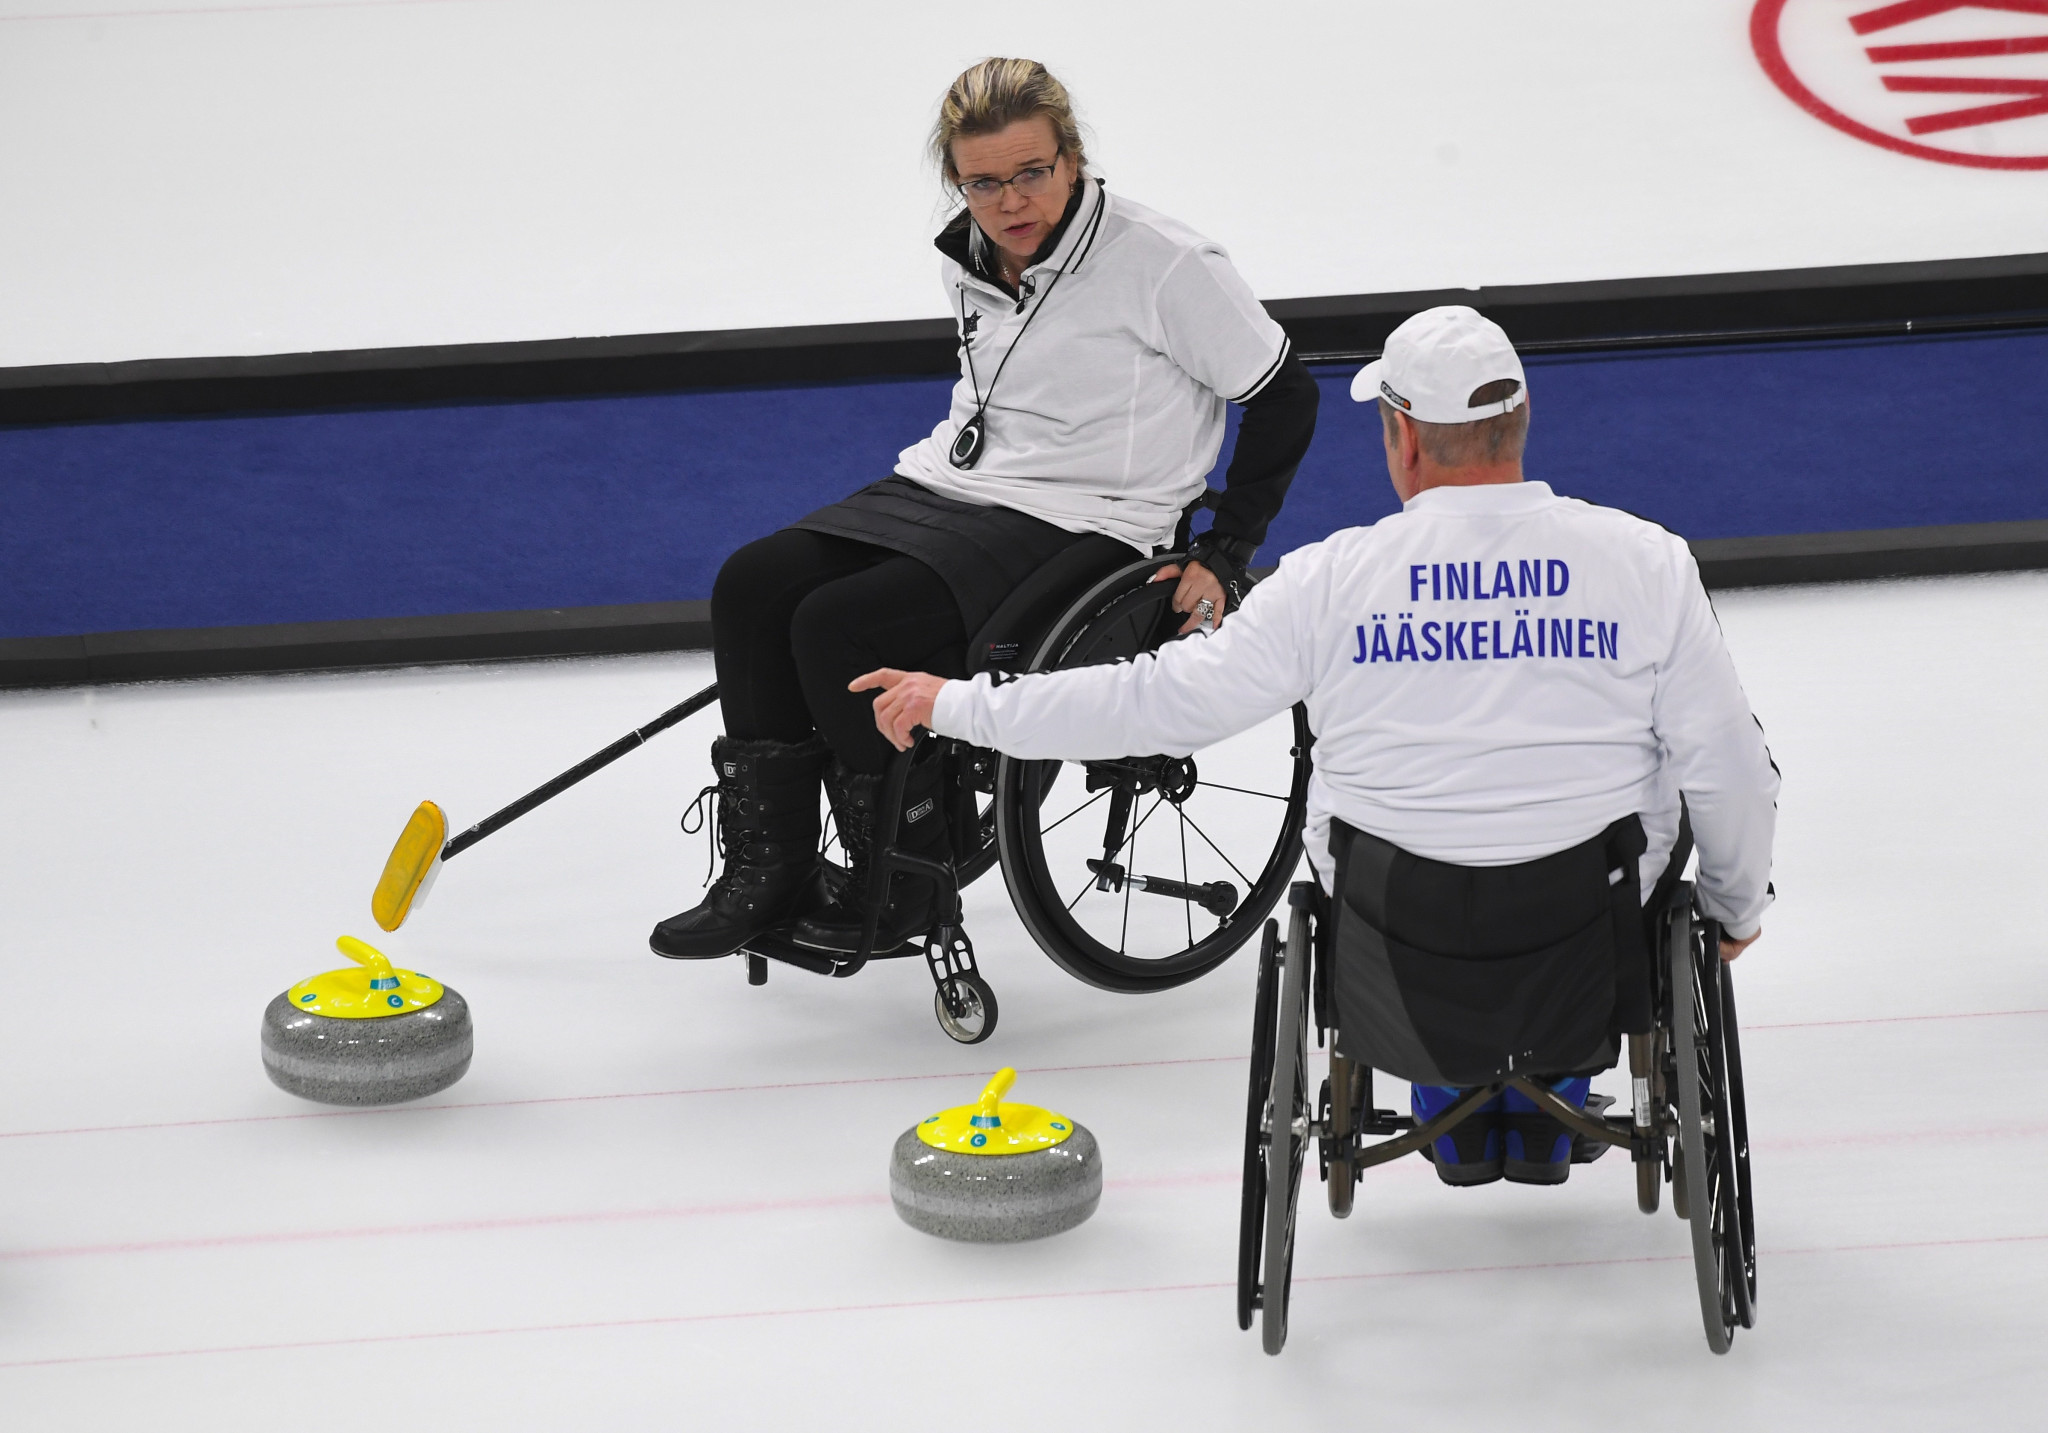 Lohja in Finland has been confirmed as host of the inaugural edition of the  World Wheelchair Mixed Doubles Curling Championship ©Getty Images